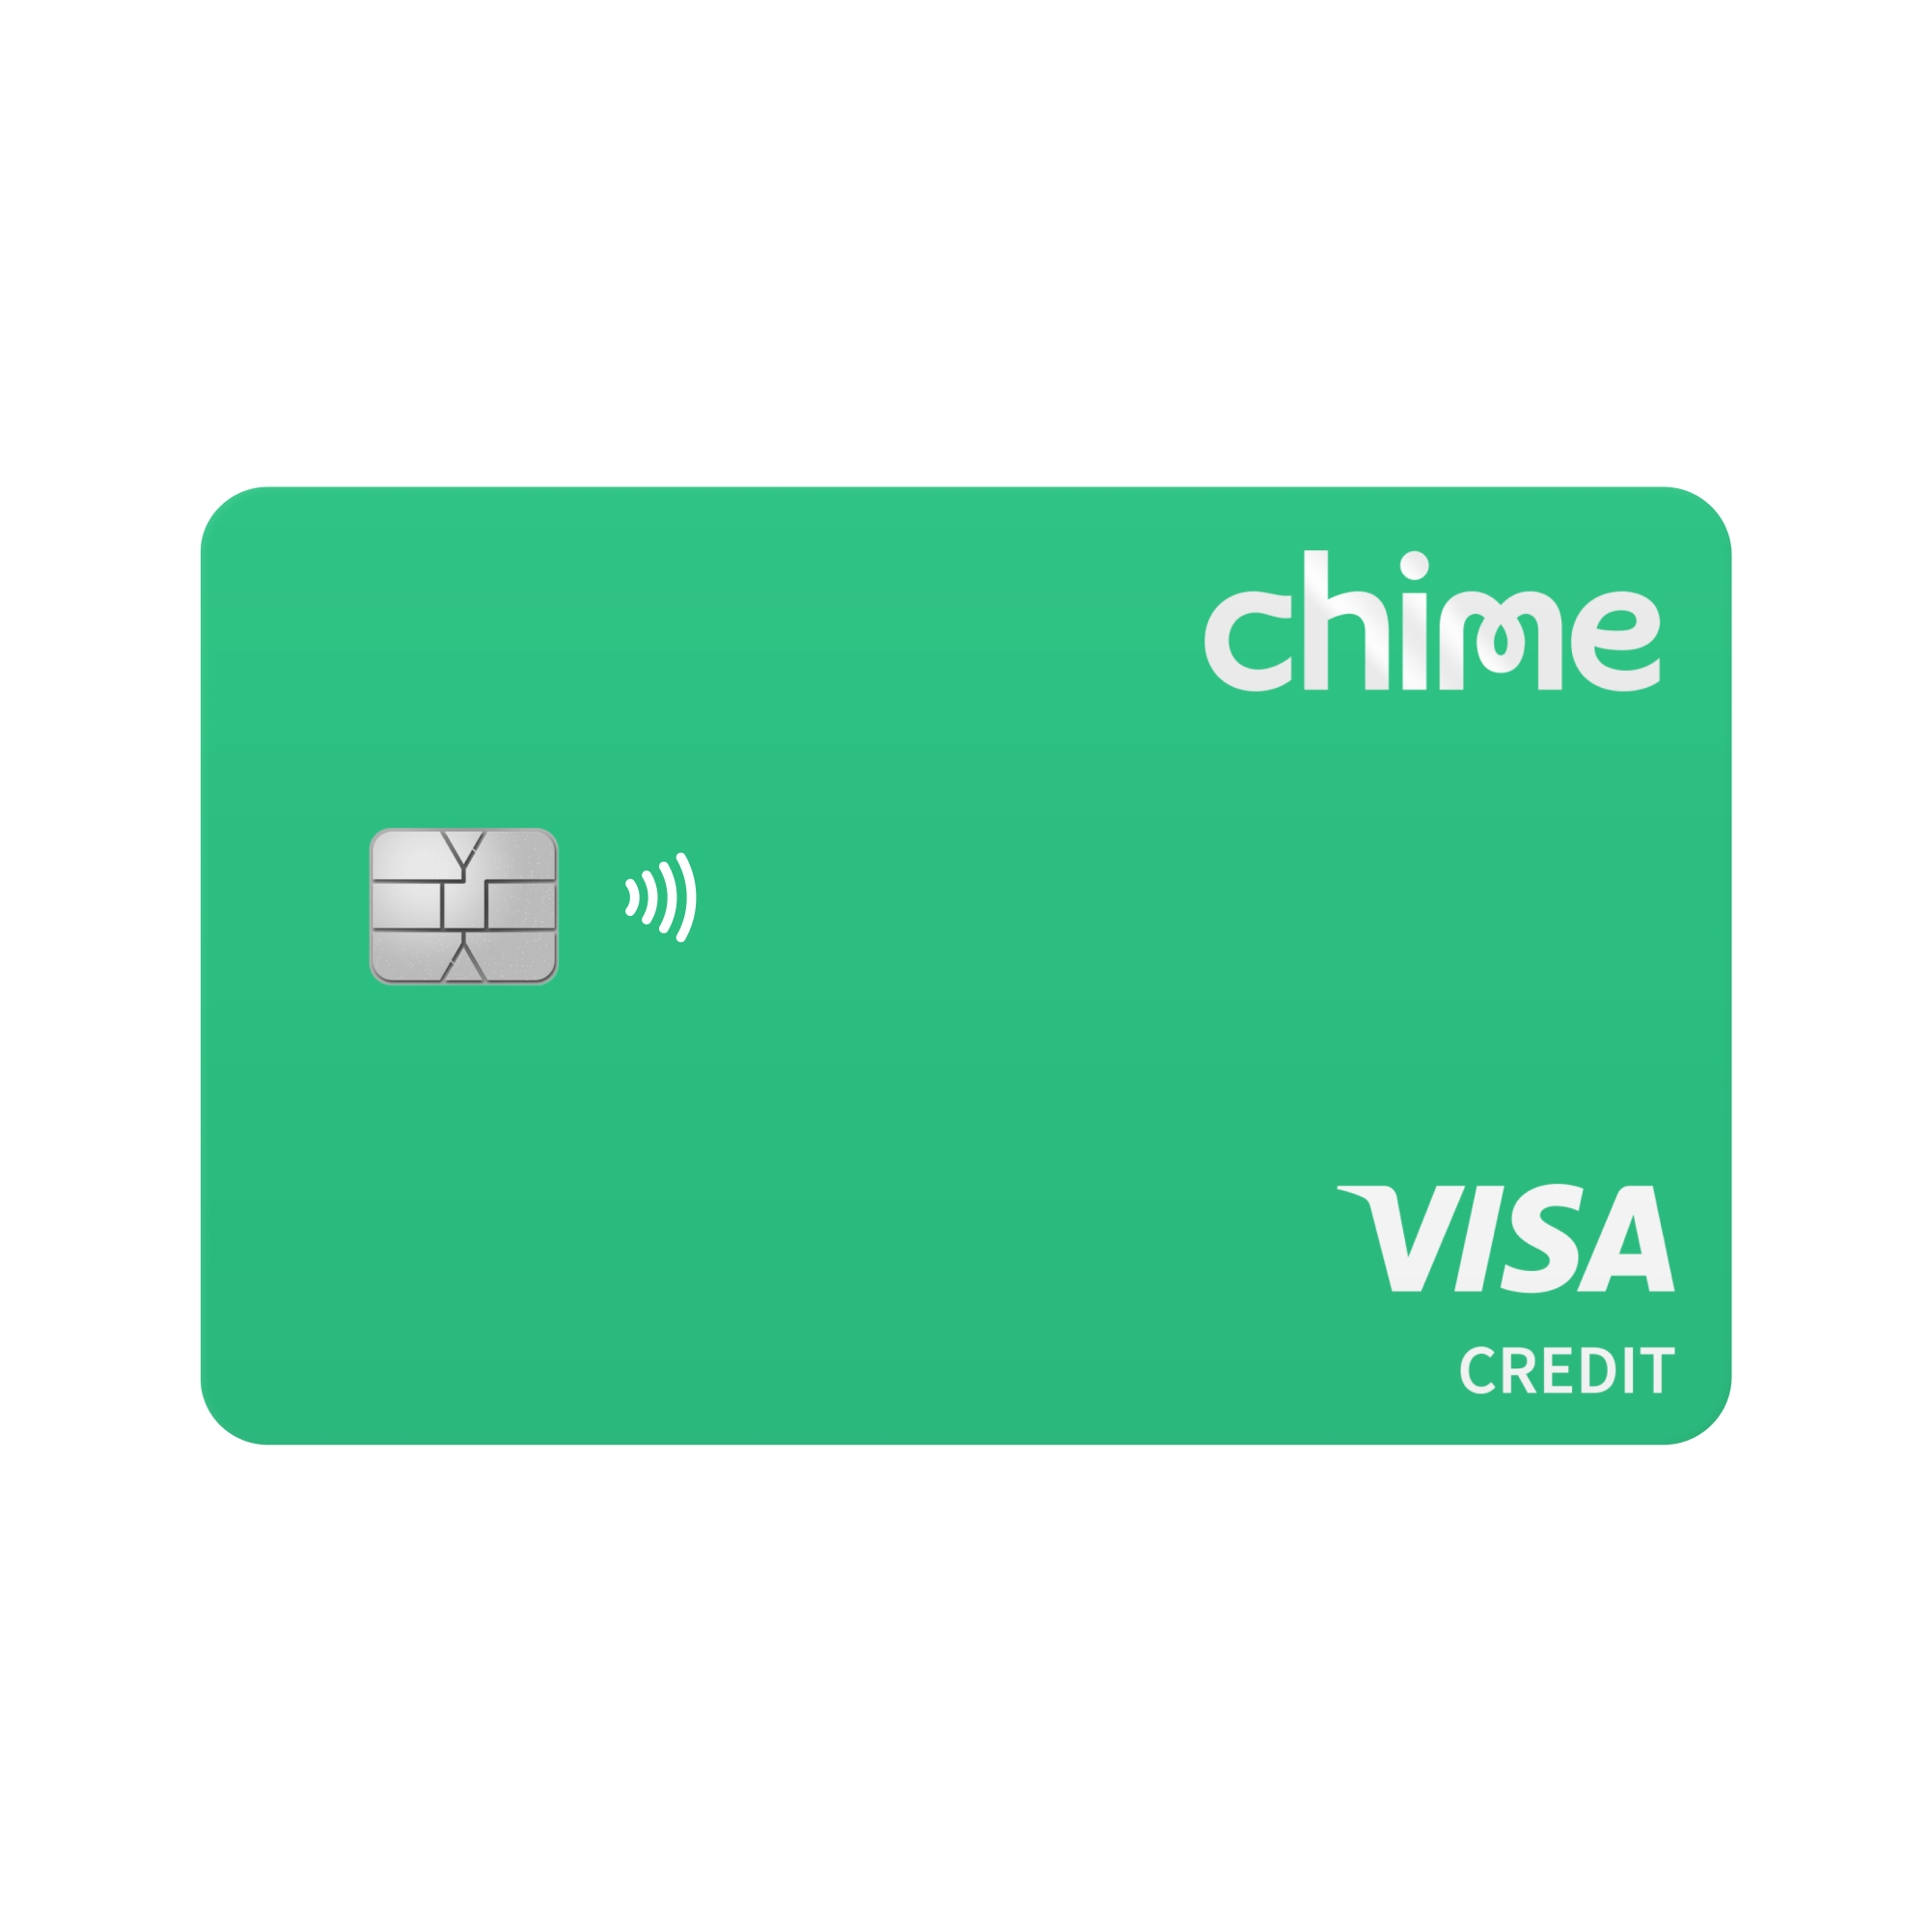 Chime credit card